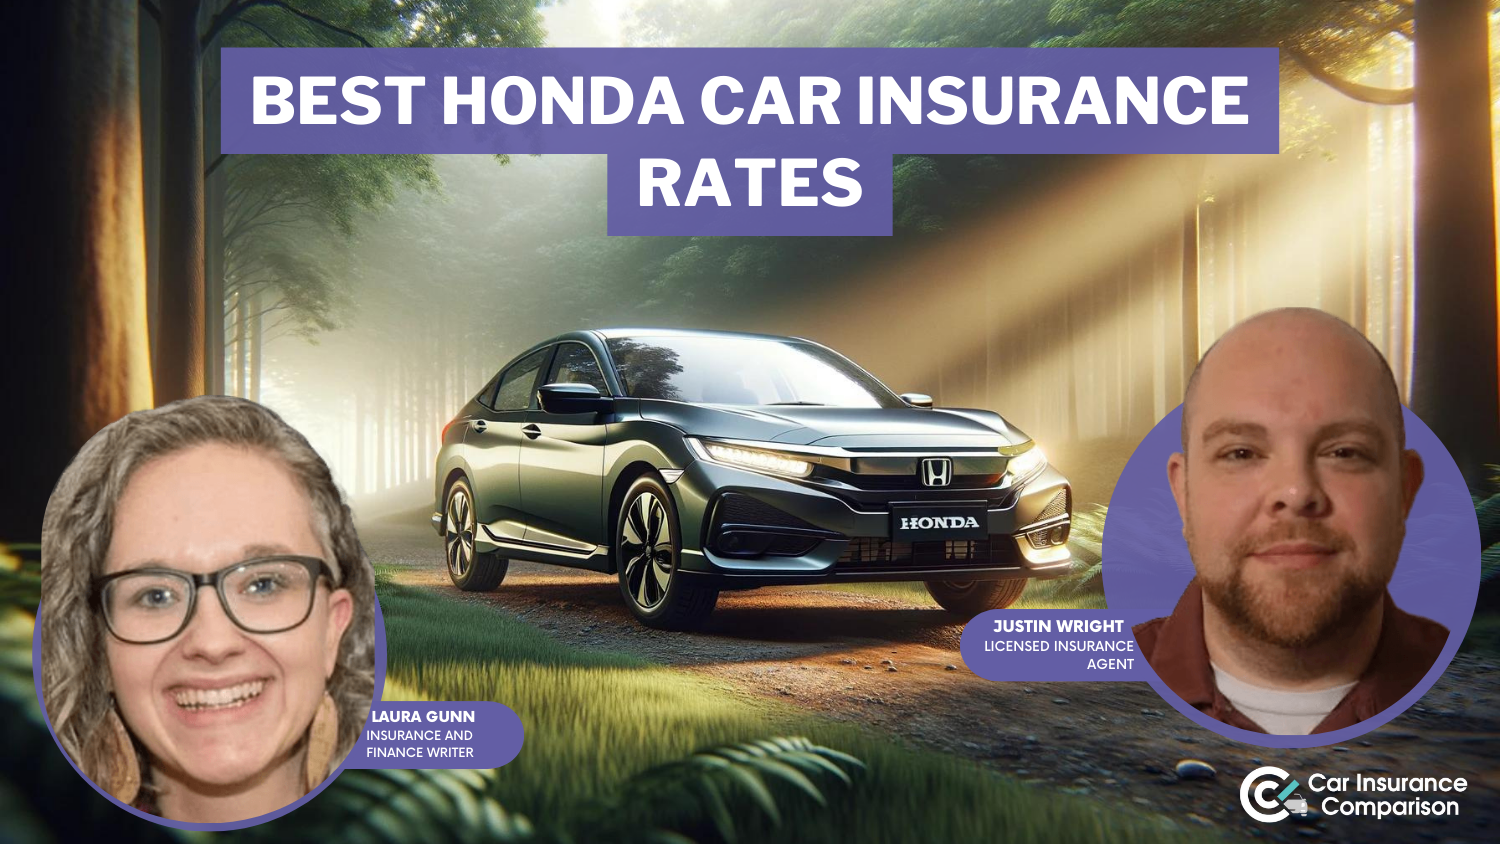 Best Honda Car Insurance Rates: State Farm, USAA, and Geico